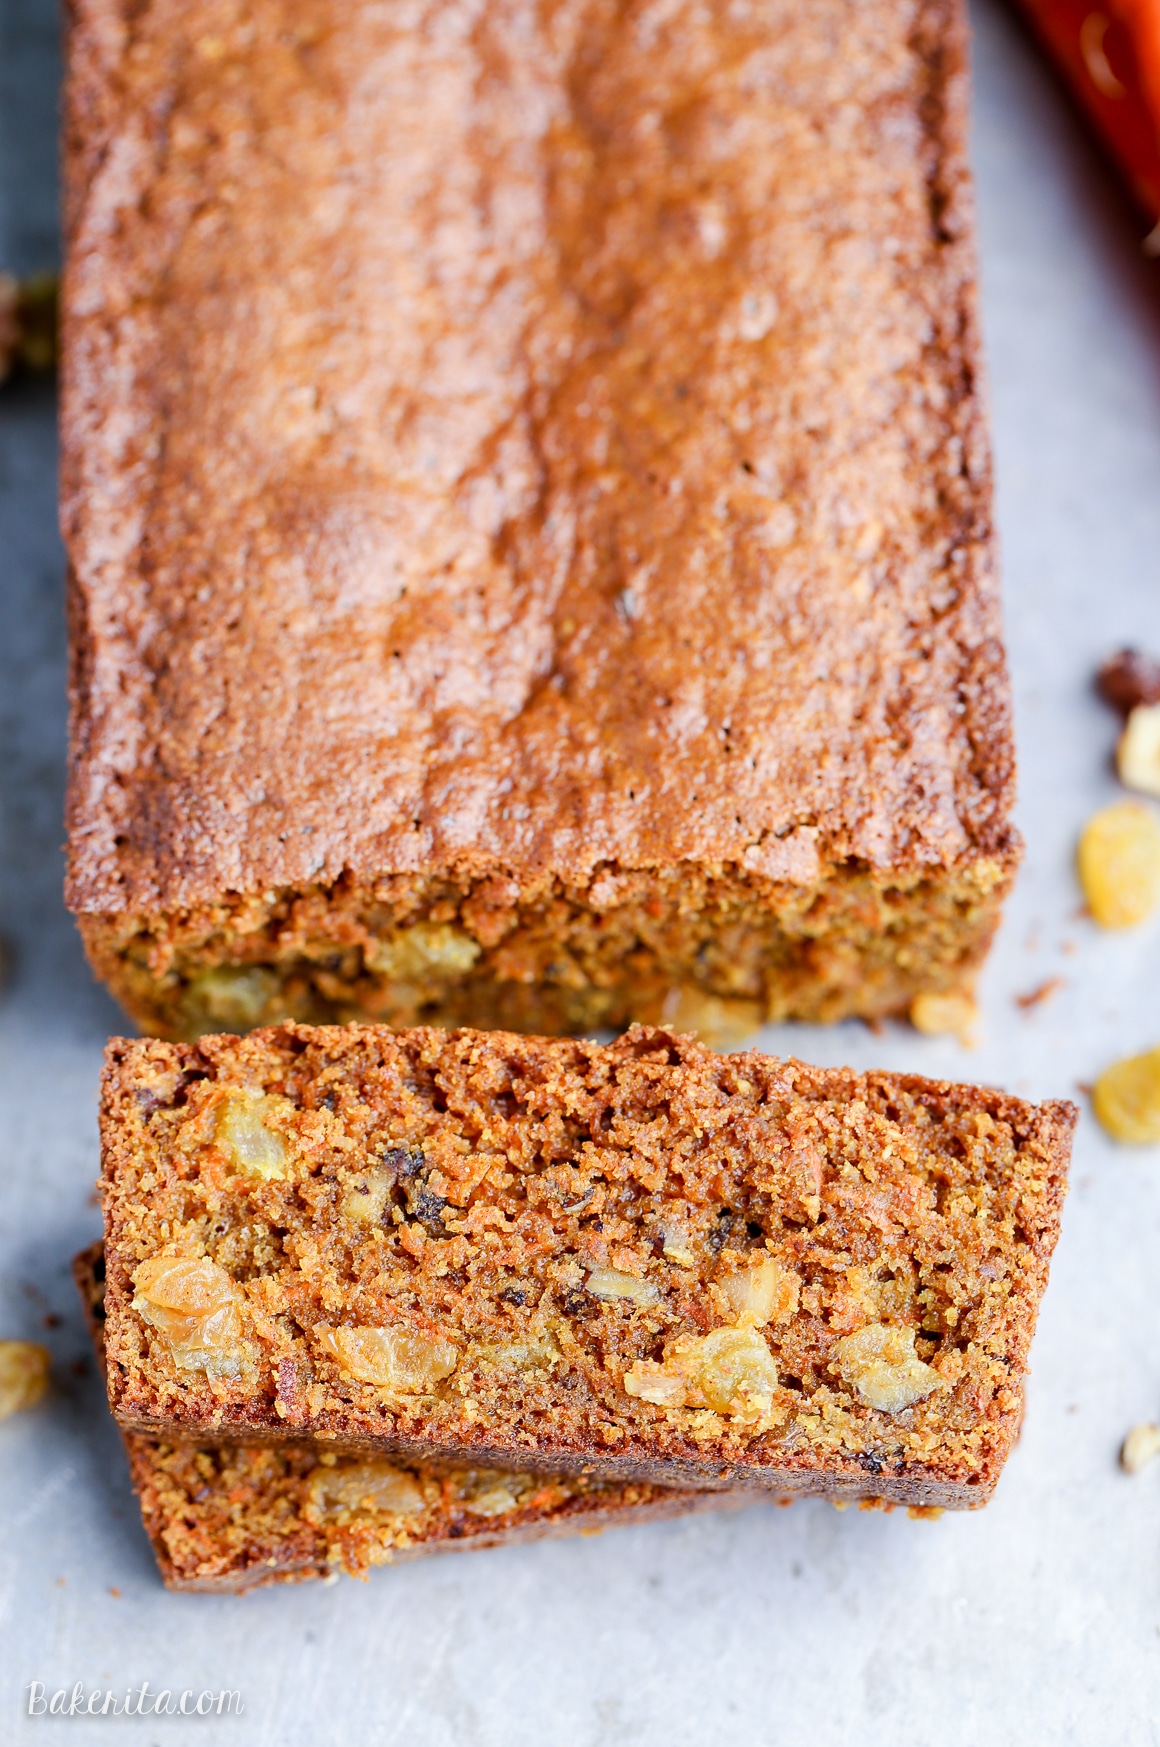 This Paleo Carrot Bread is incredibly moist, and full of spices, chopped walnuts and golden raisins. This hearty bread is gluten-free and refined sugar free.